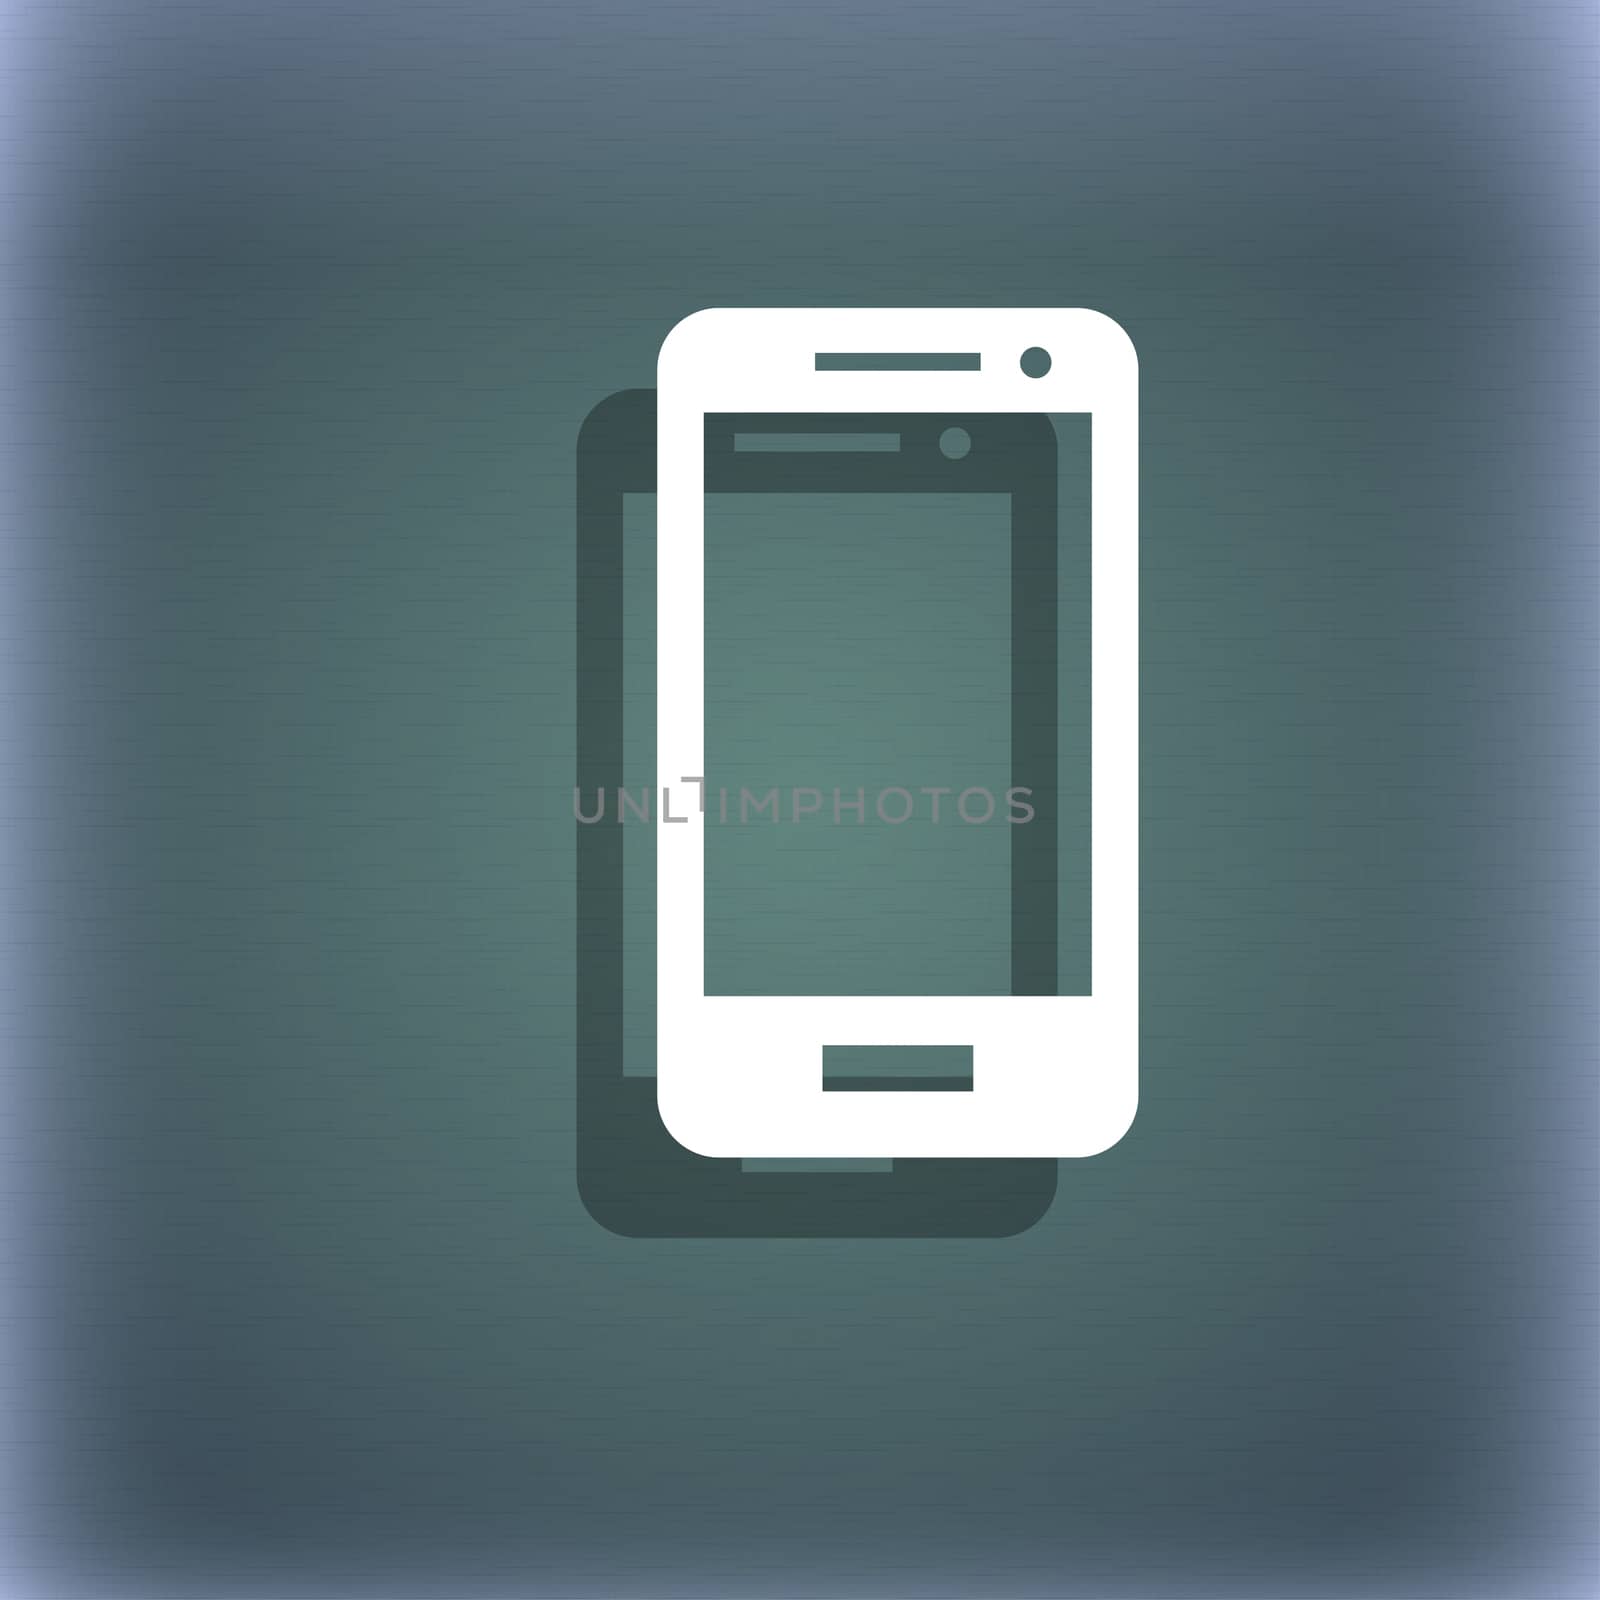 Smartphone sign icon. Support symbol. Call center. On the blue-green abstract background with shadow and space for your text. illustration